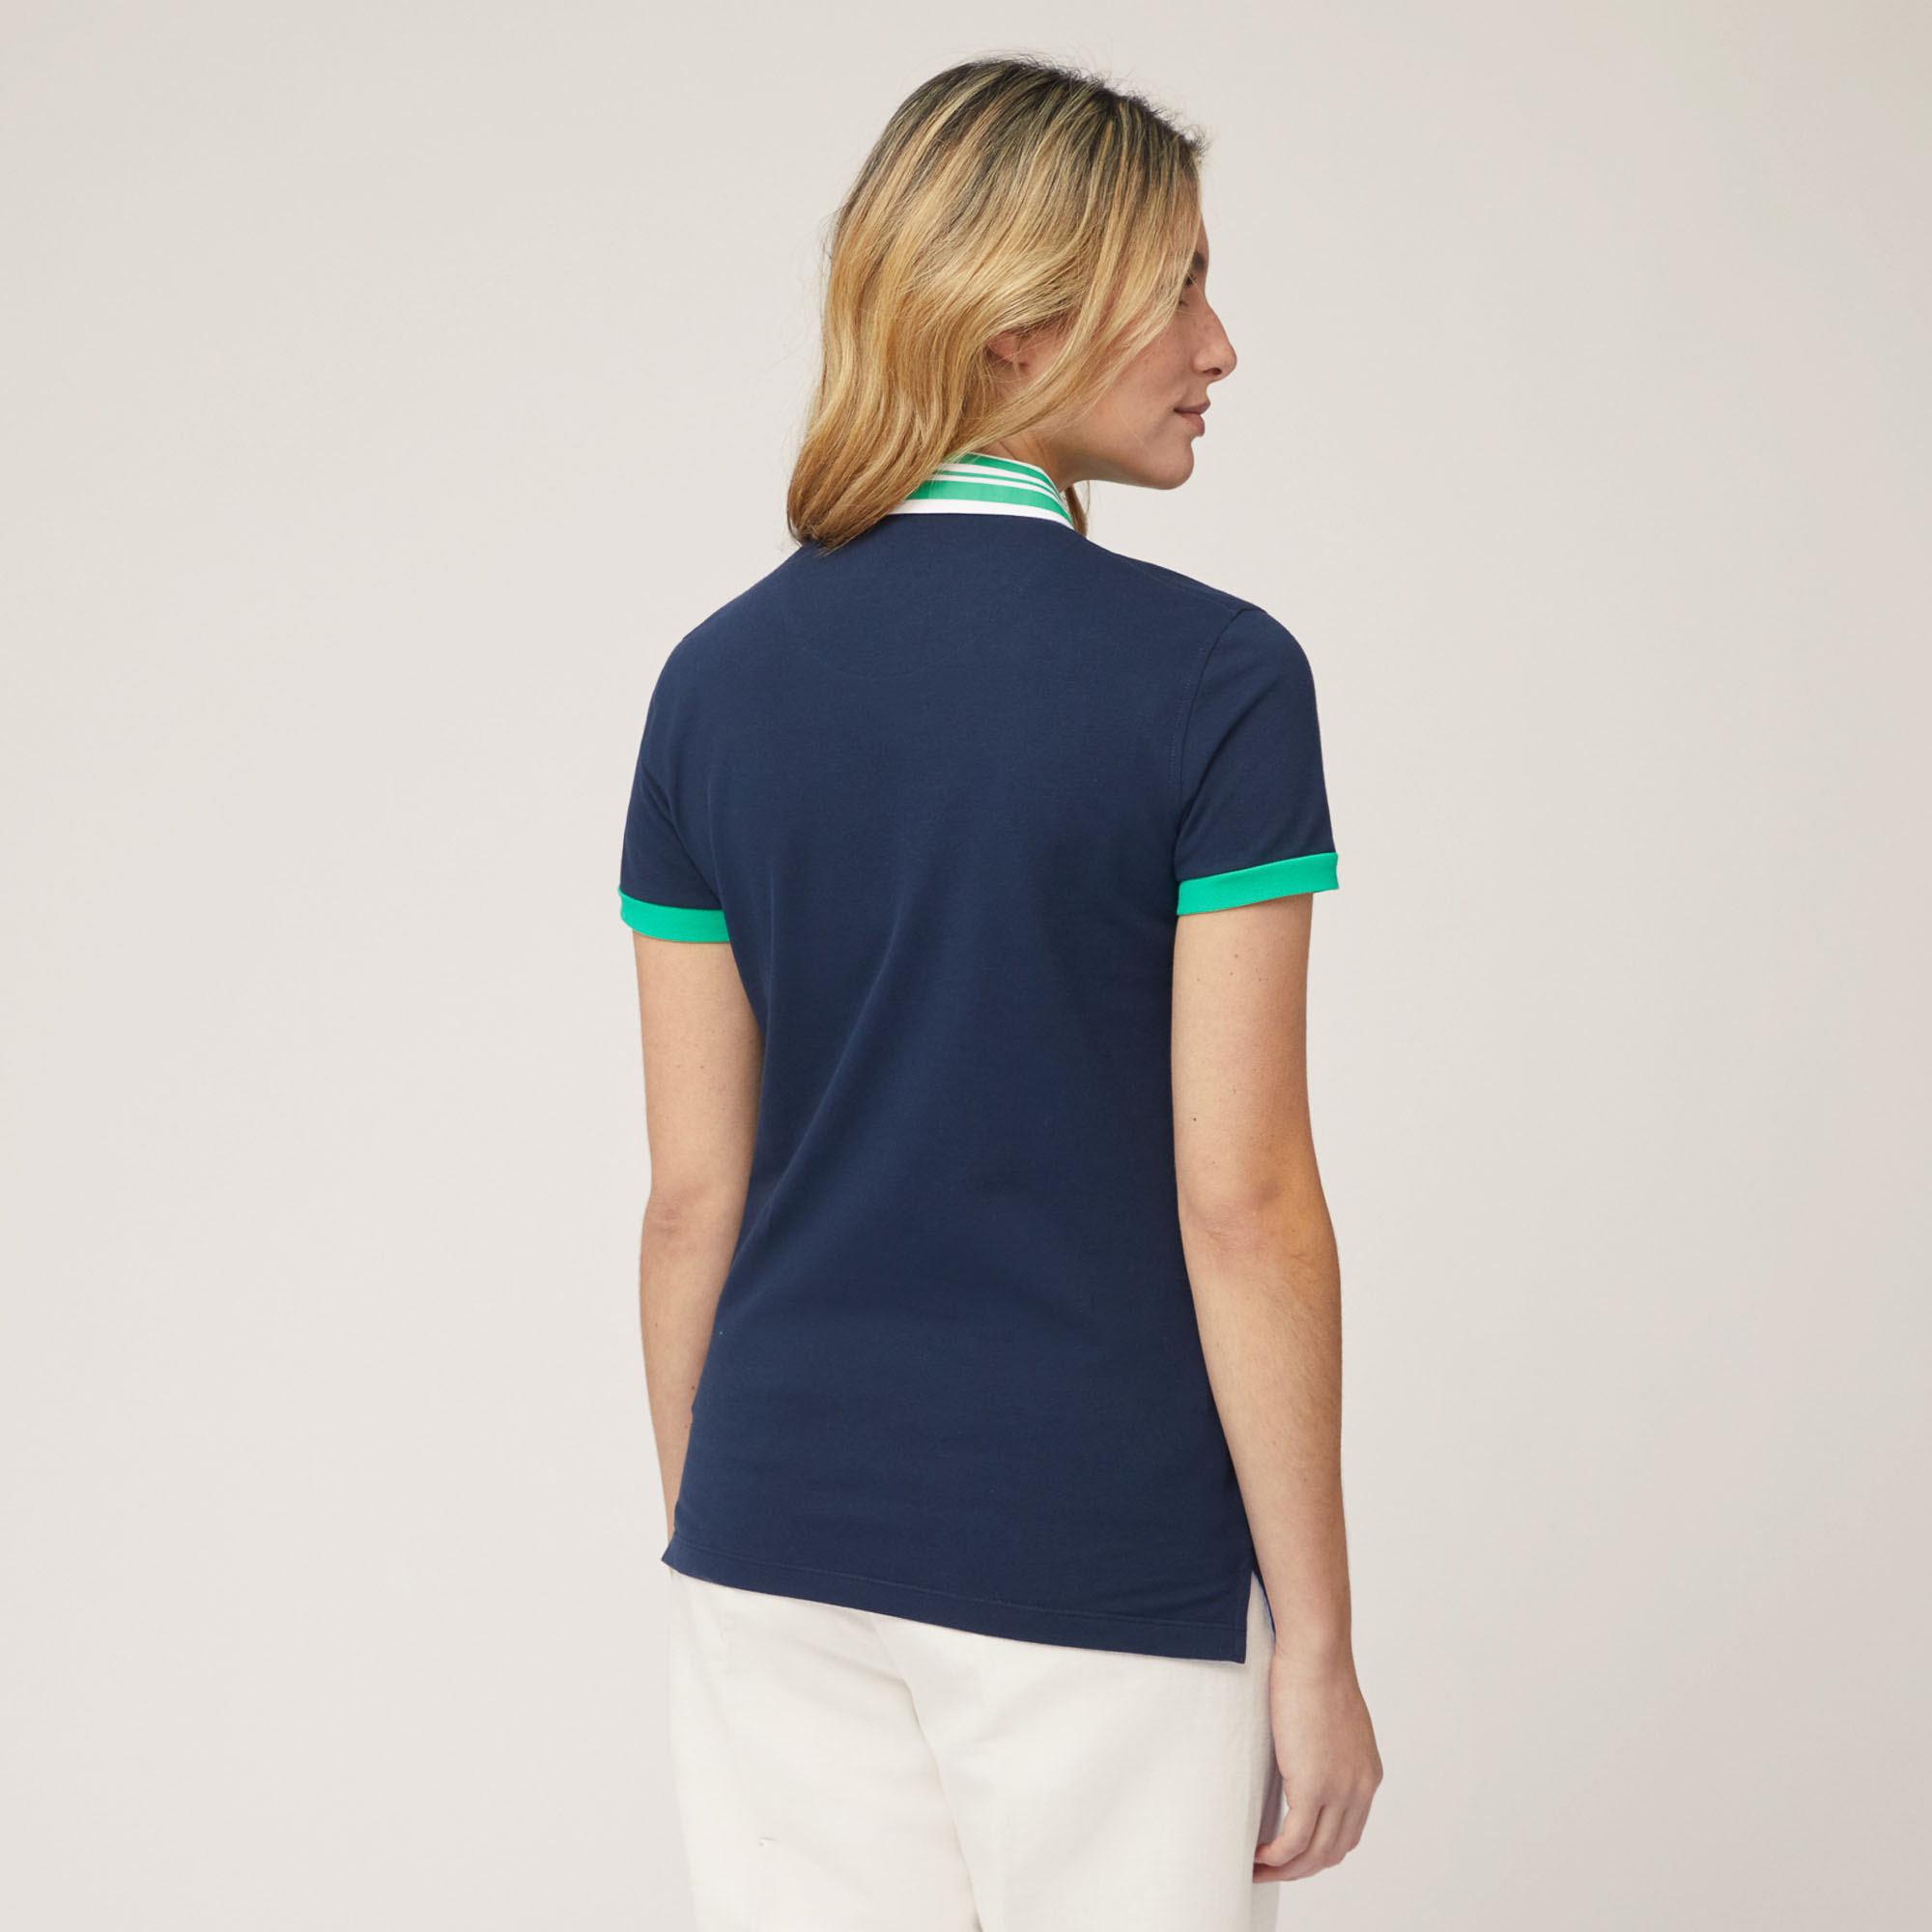 Vietri Polo Shirt with Printed Collar, Blue, large image number 1